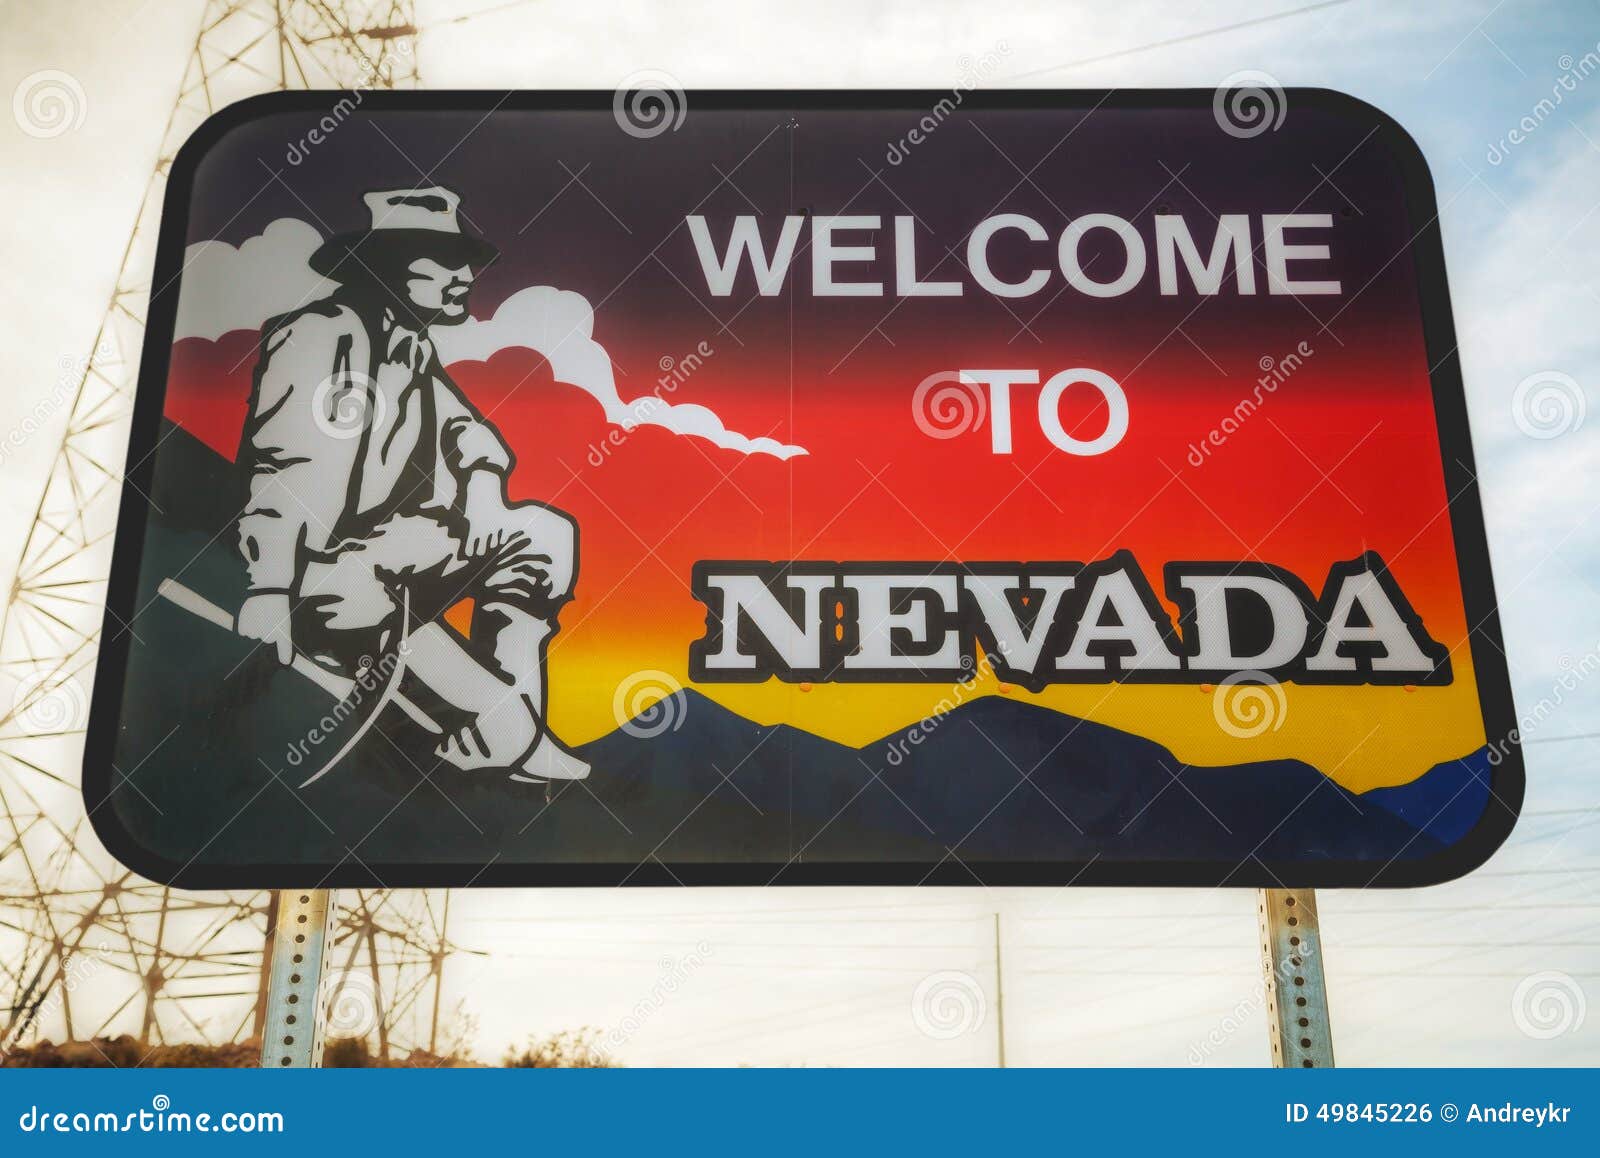 welcome to nevada road sign